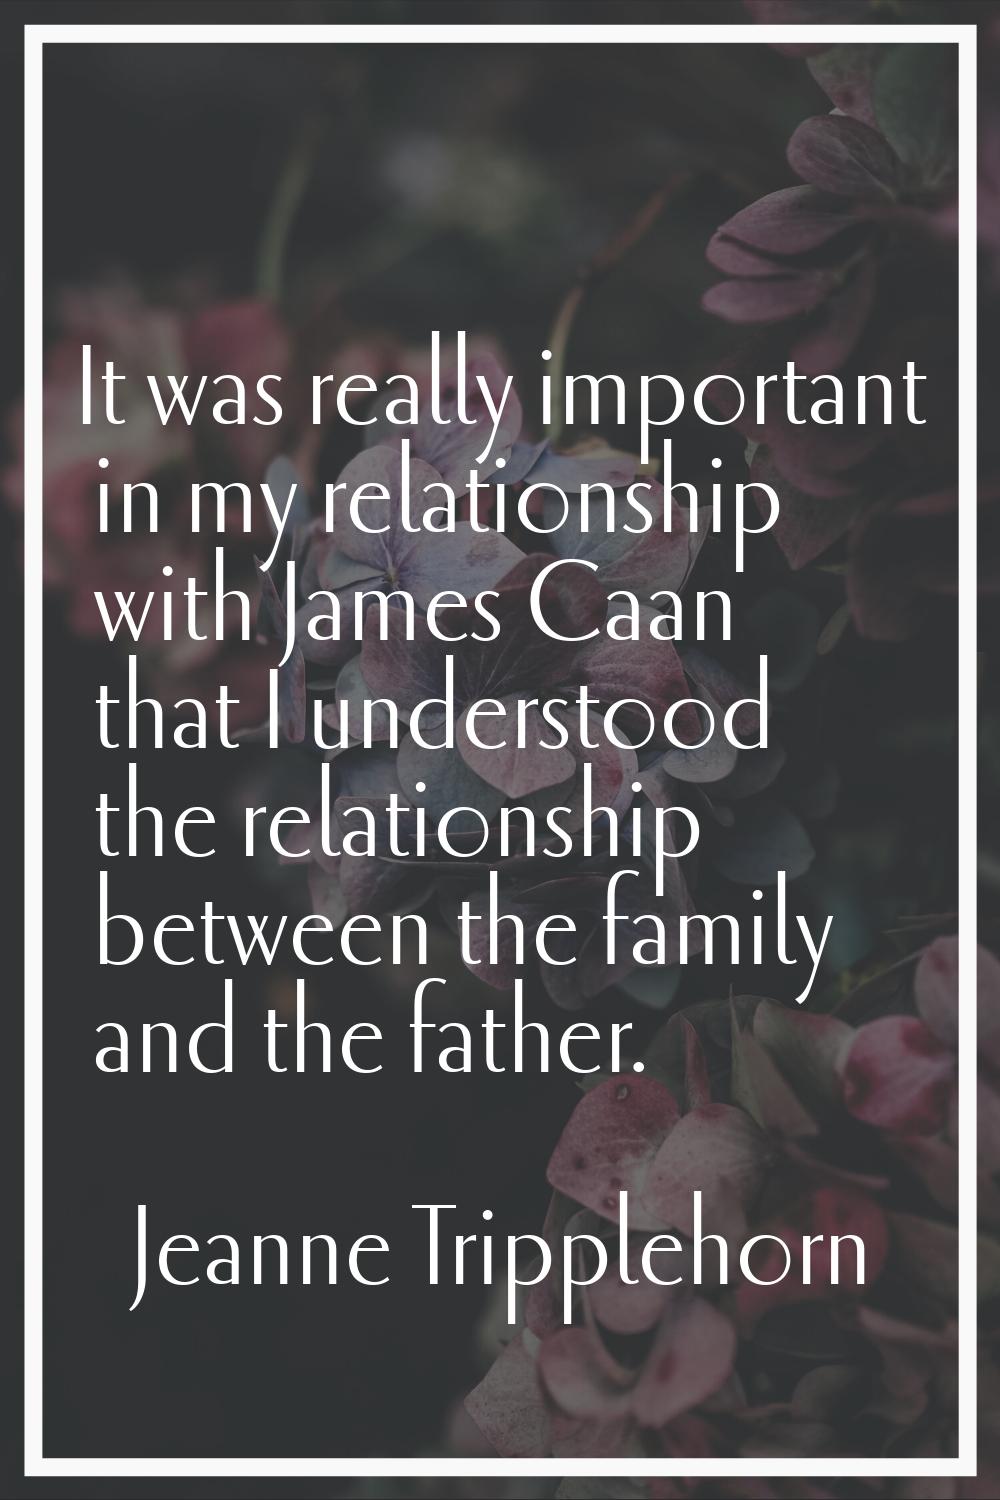 It was really important in my relationship with James Caan that I understood the relationship betwe